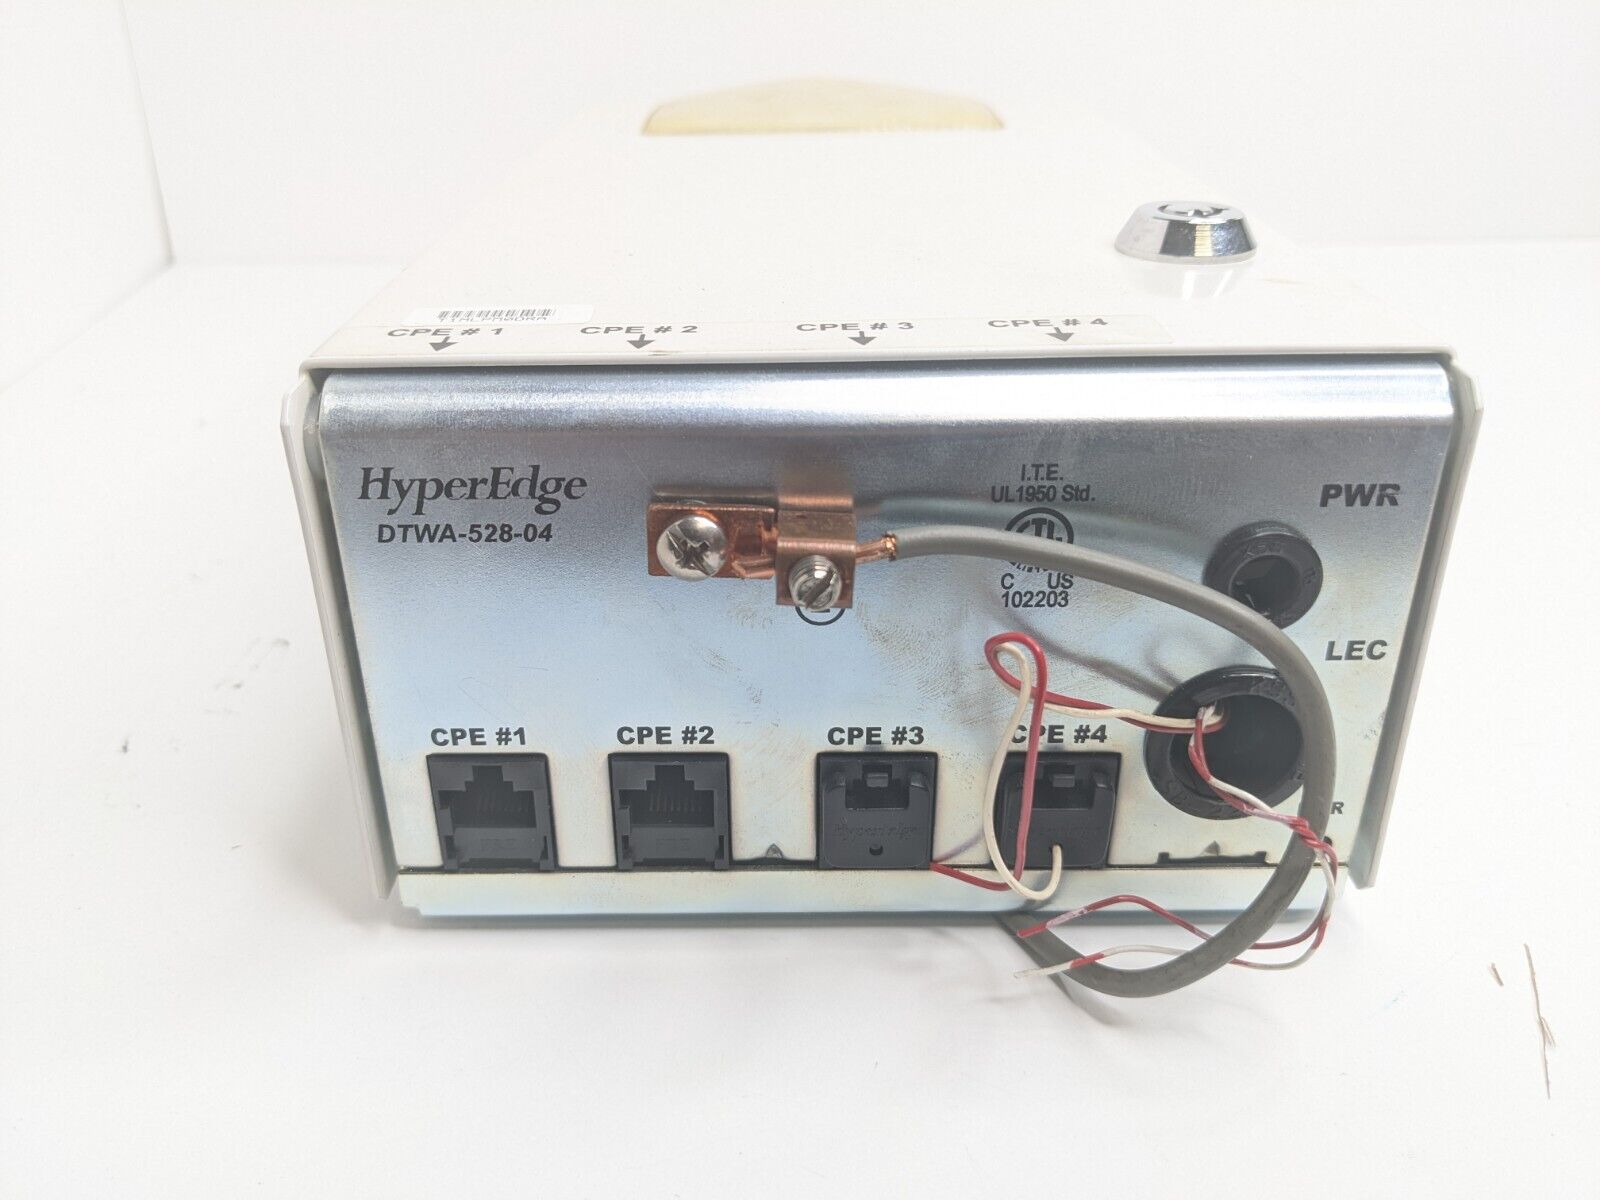 Hyperedge dtwa-528-04 w/ 1223026L5 cards